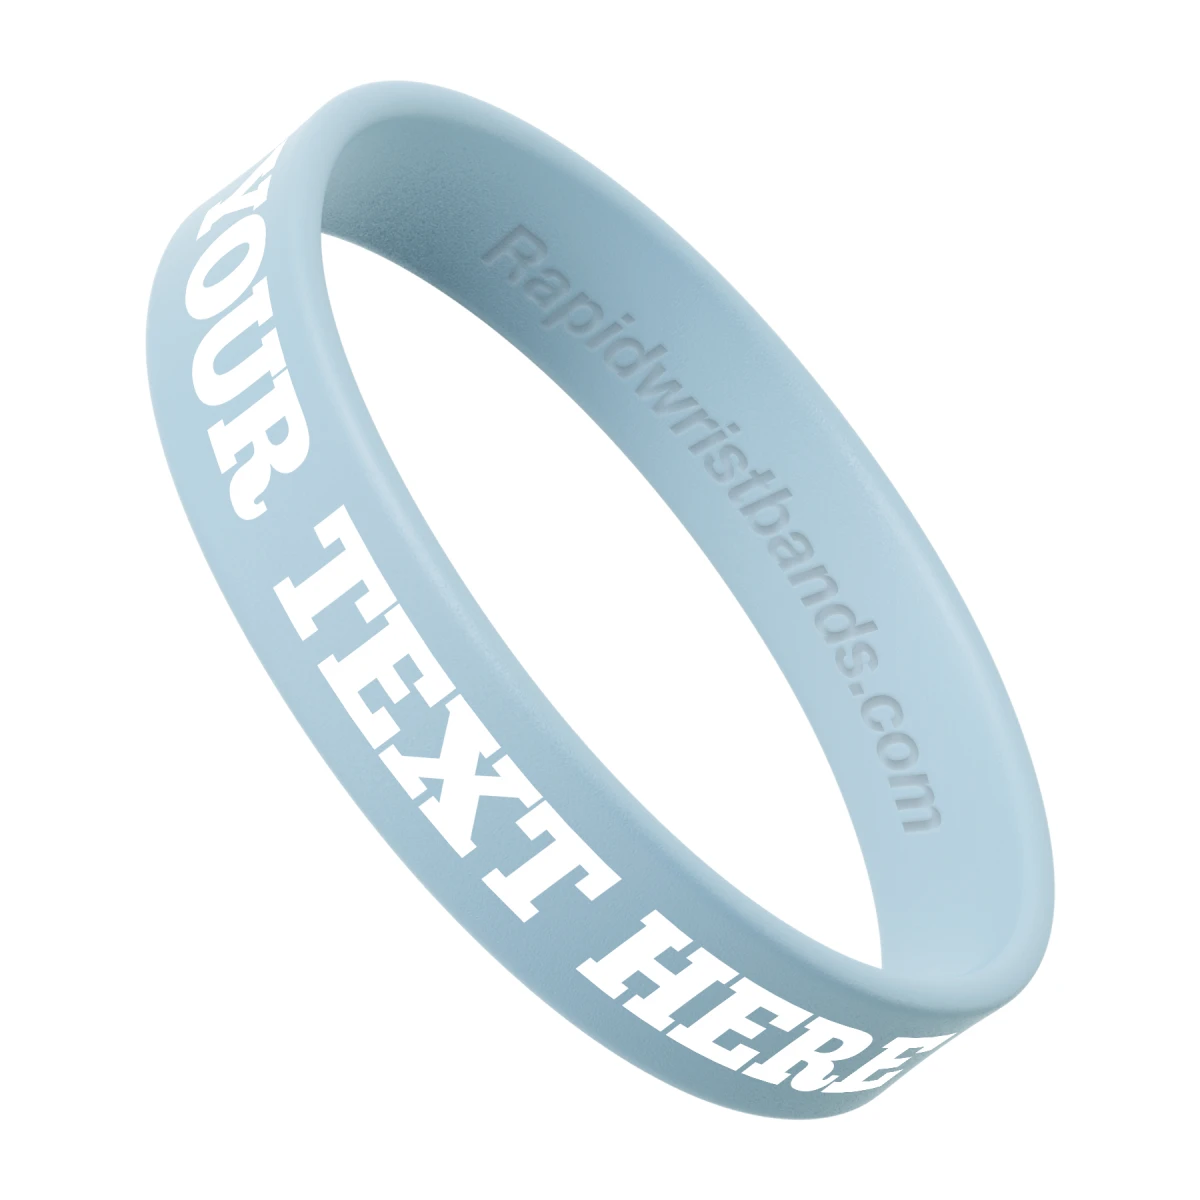 Pearl Blue Wristband With Your Text Here Printed In White